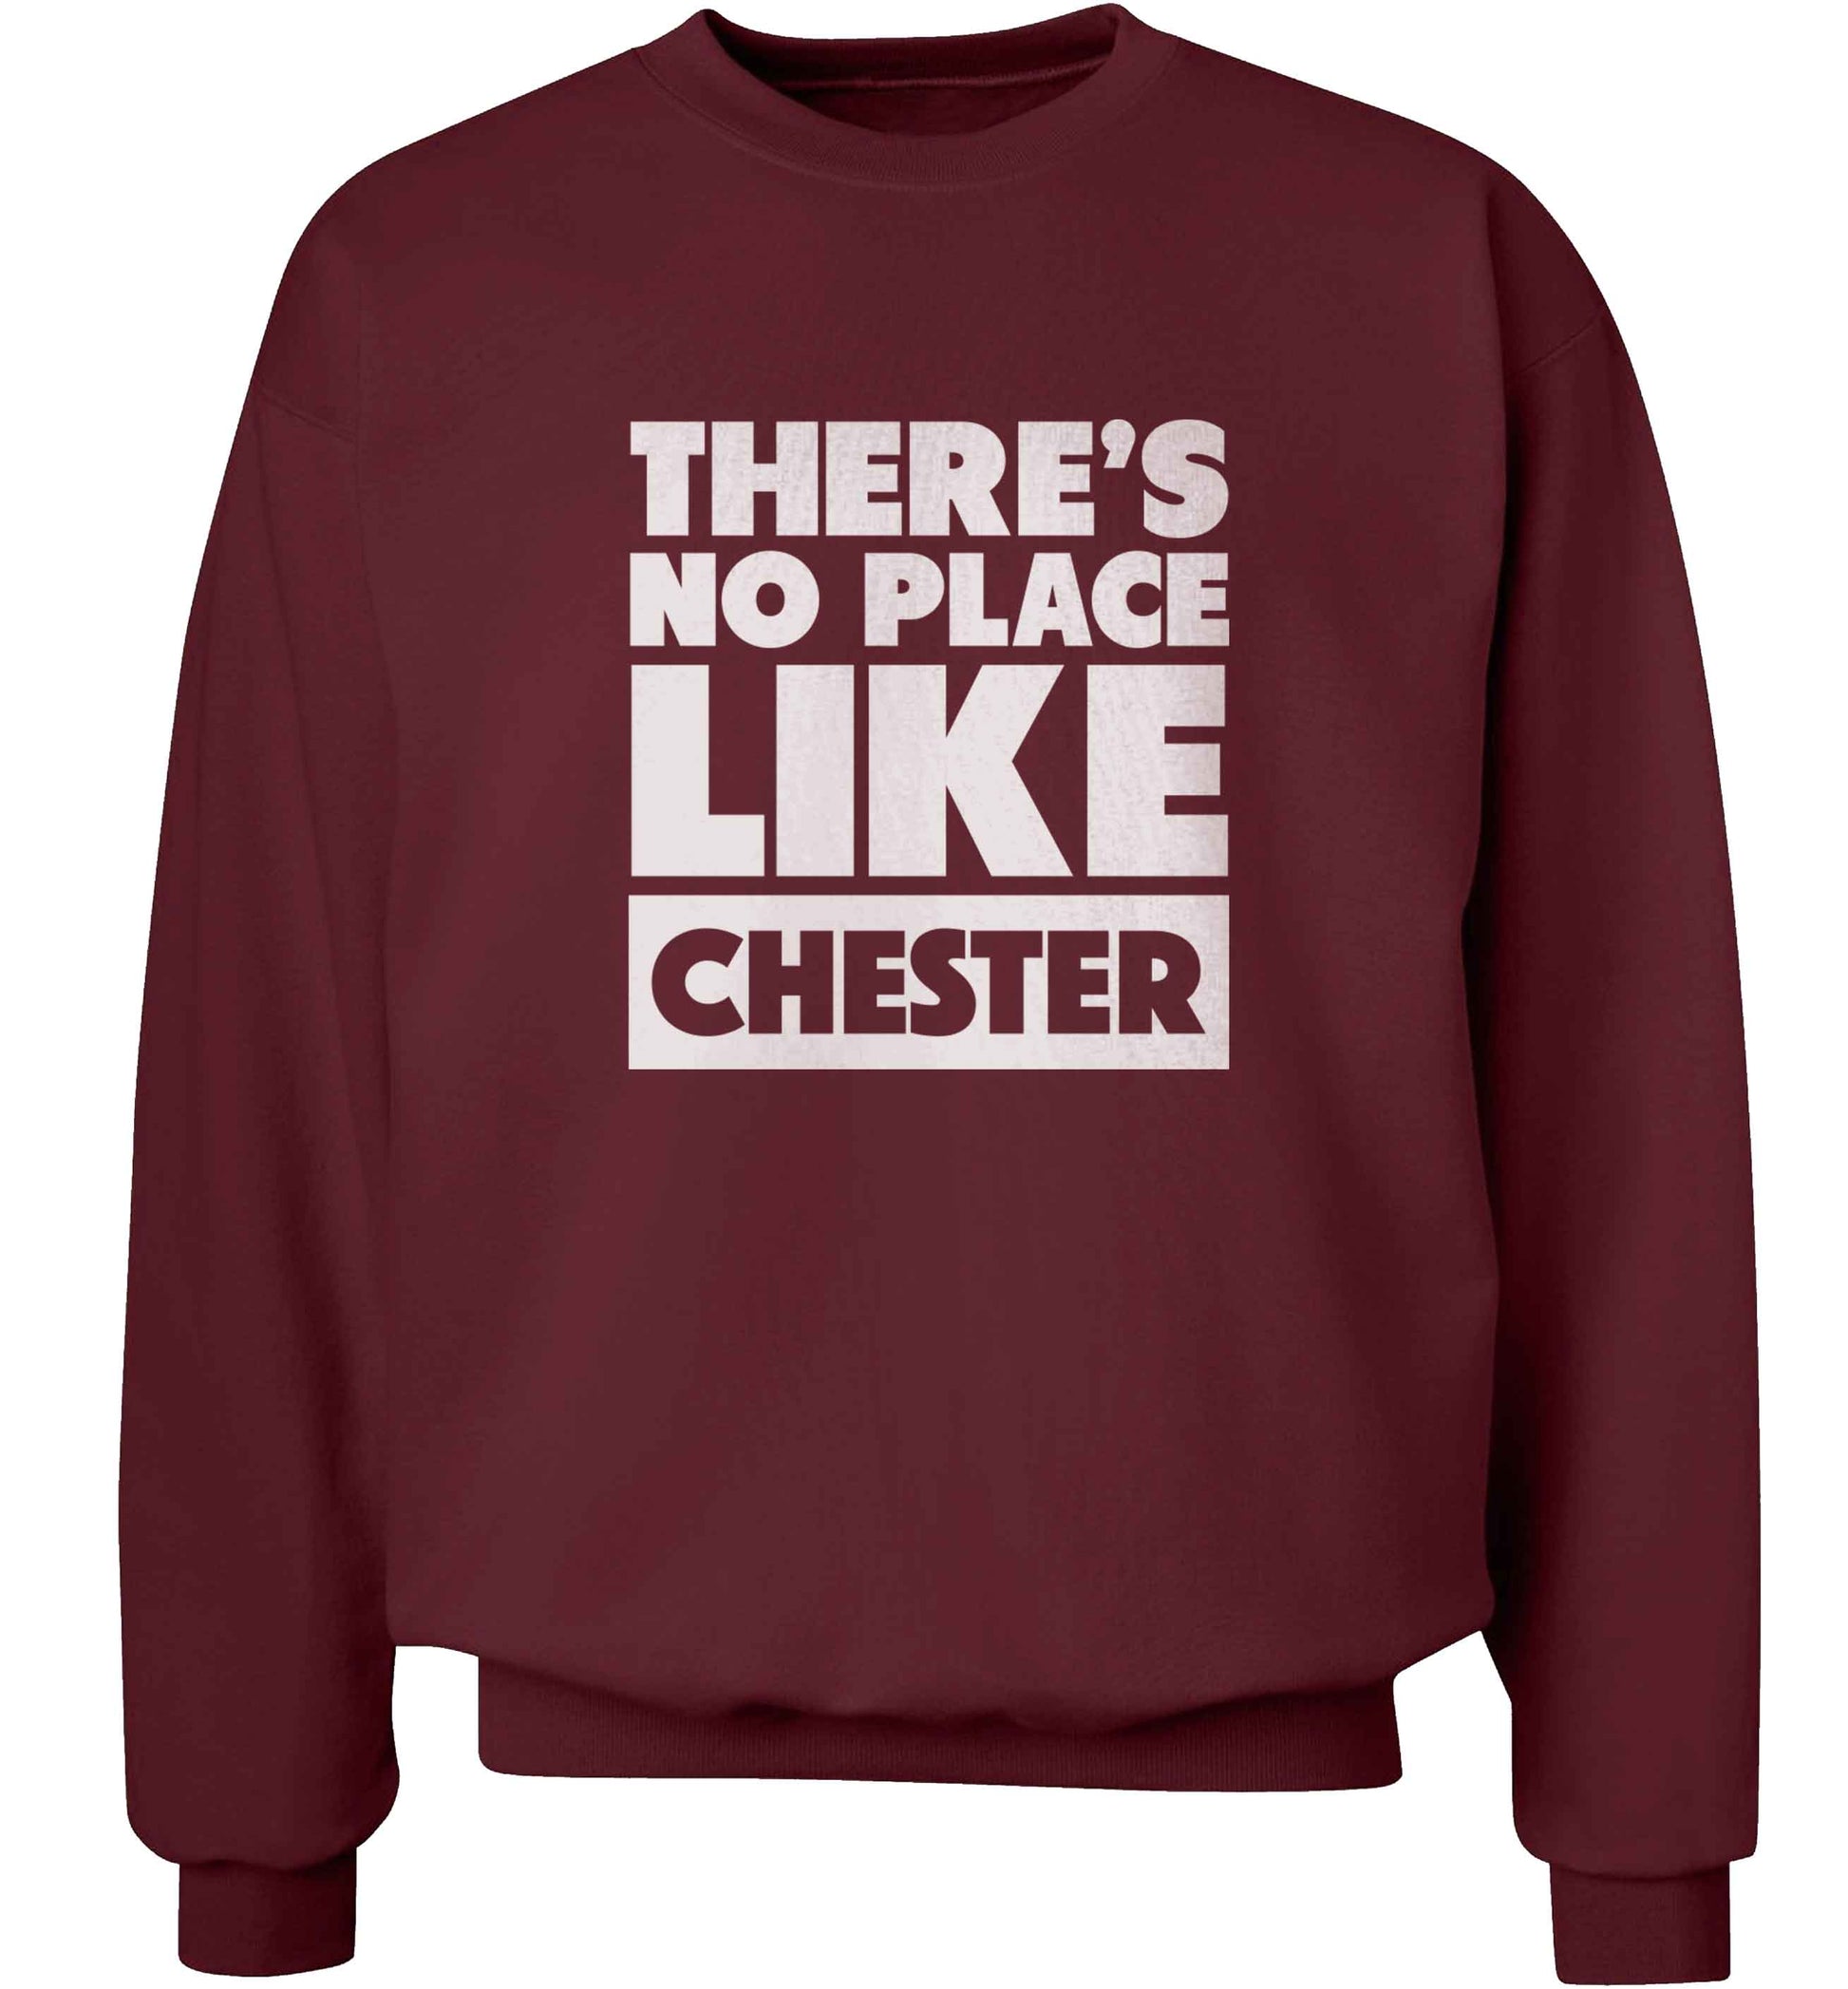 There's no place like Chester adult's unisex maroon sweater 2XL